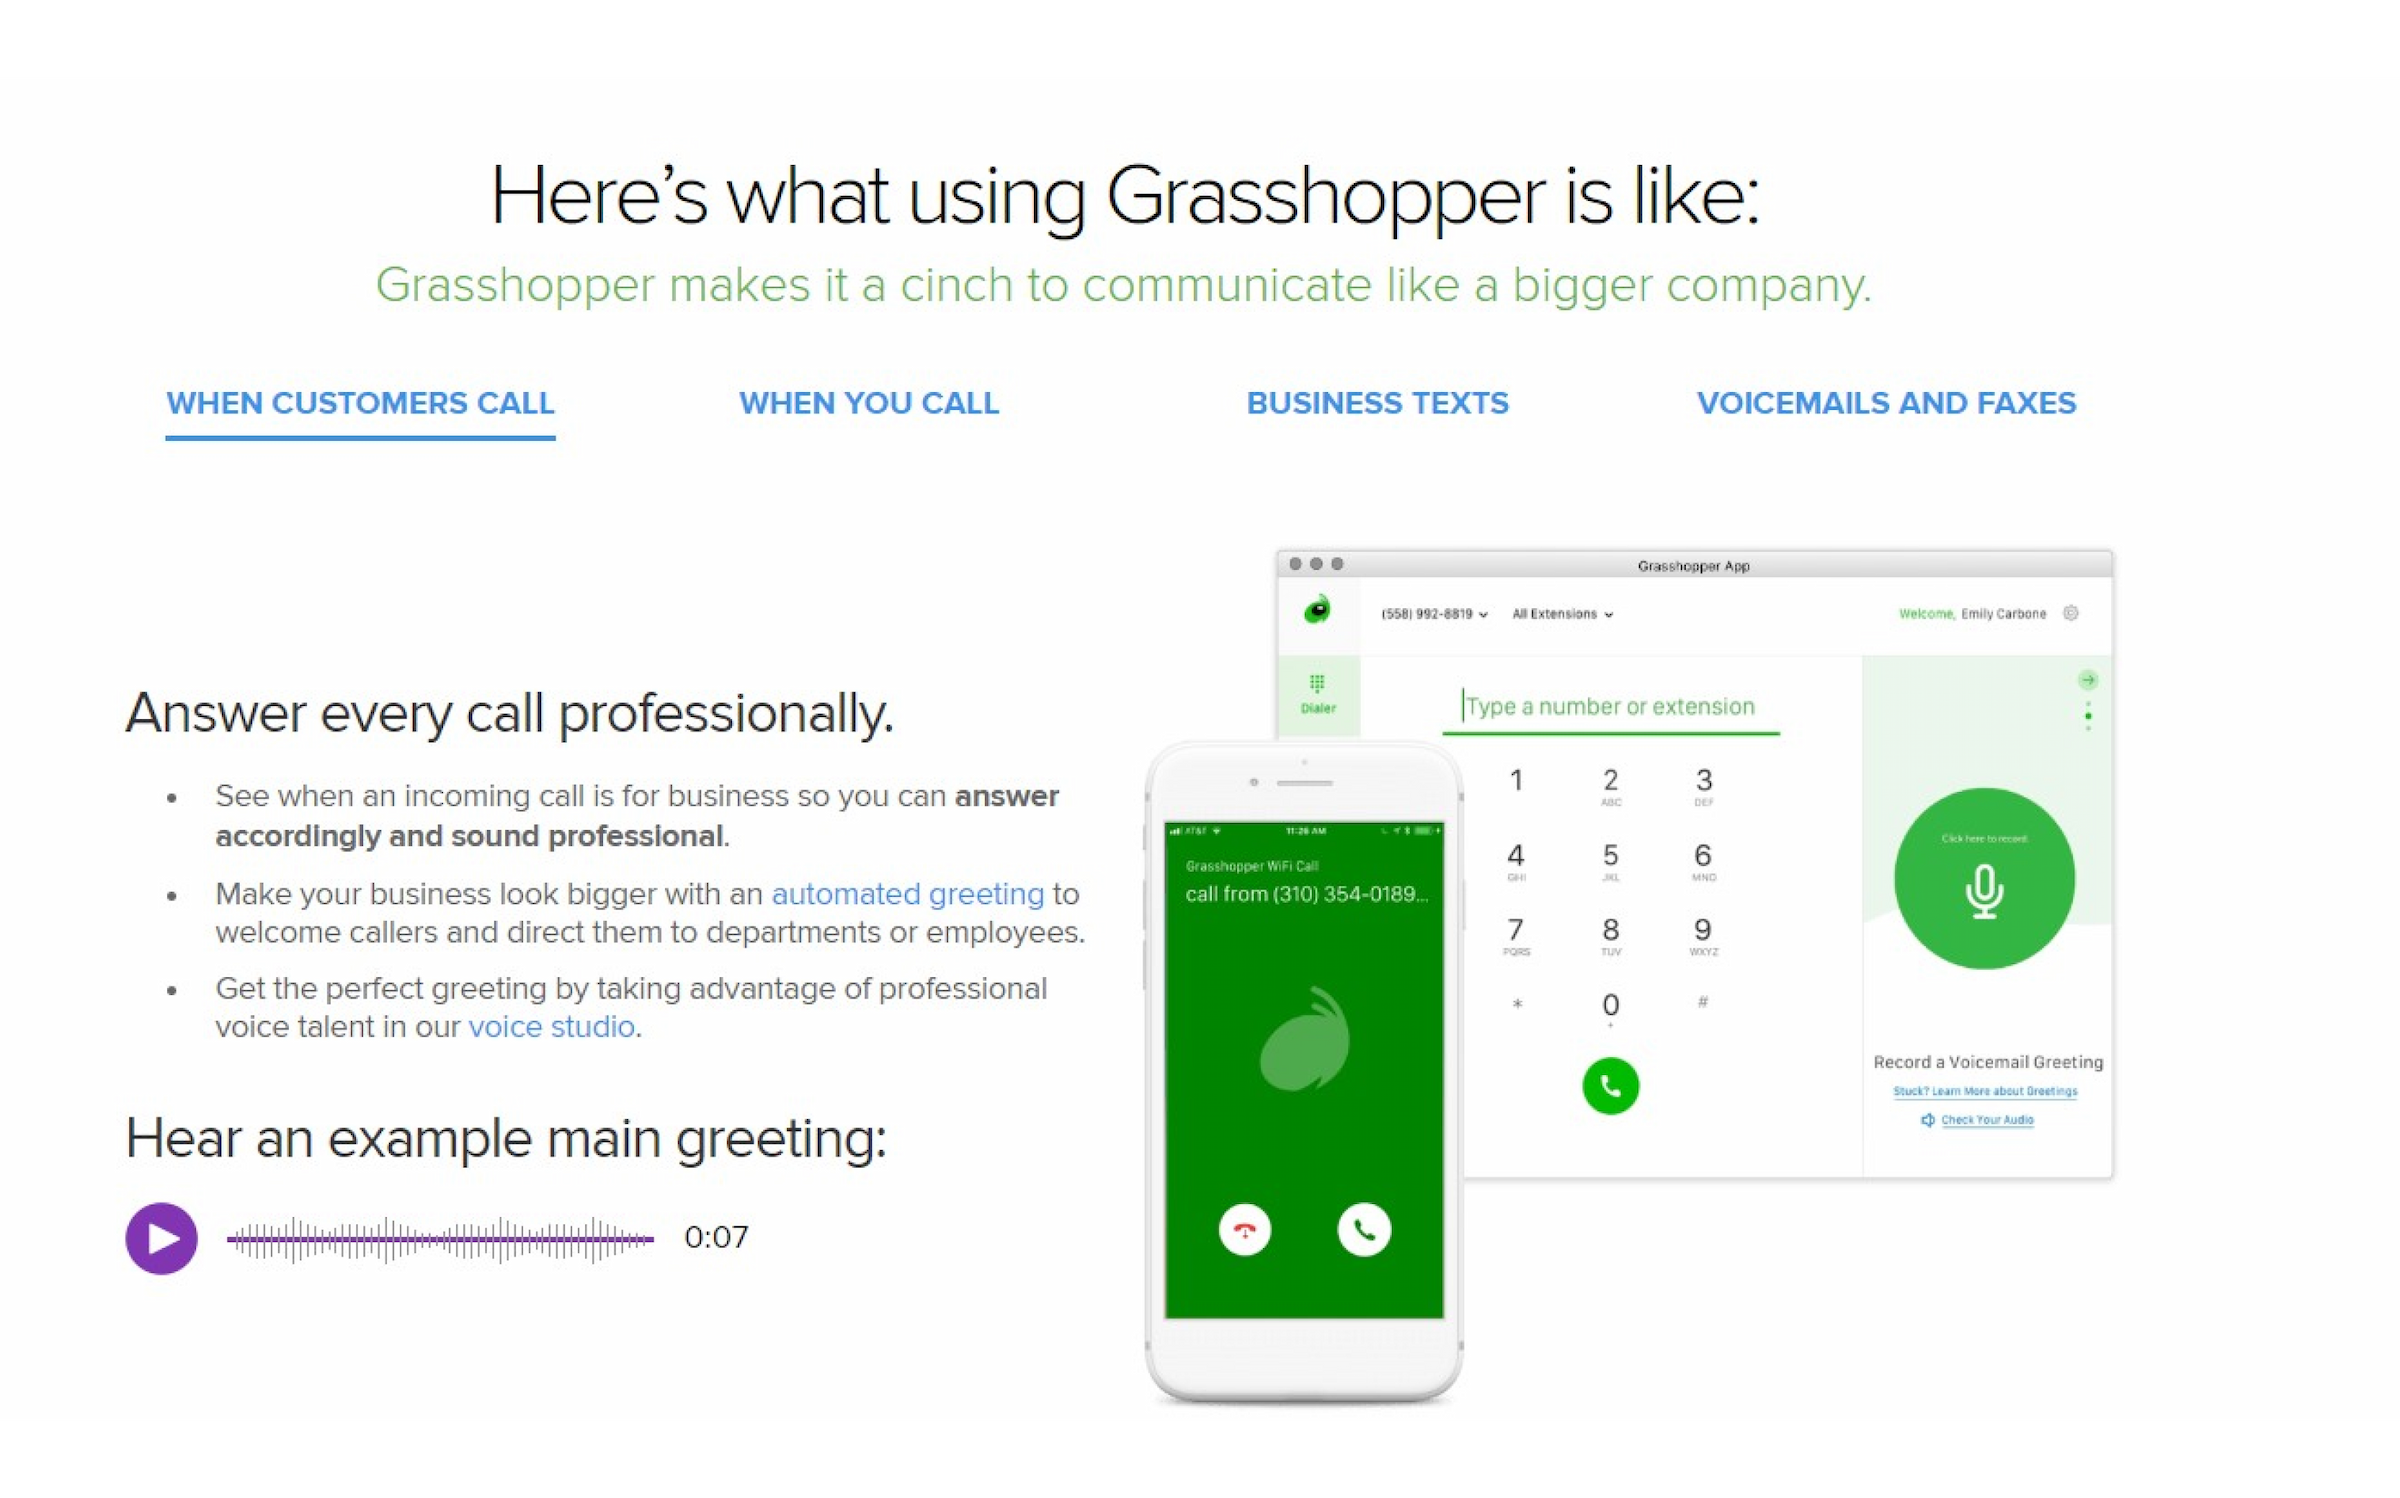 Features of Grasshopper